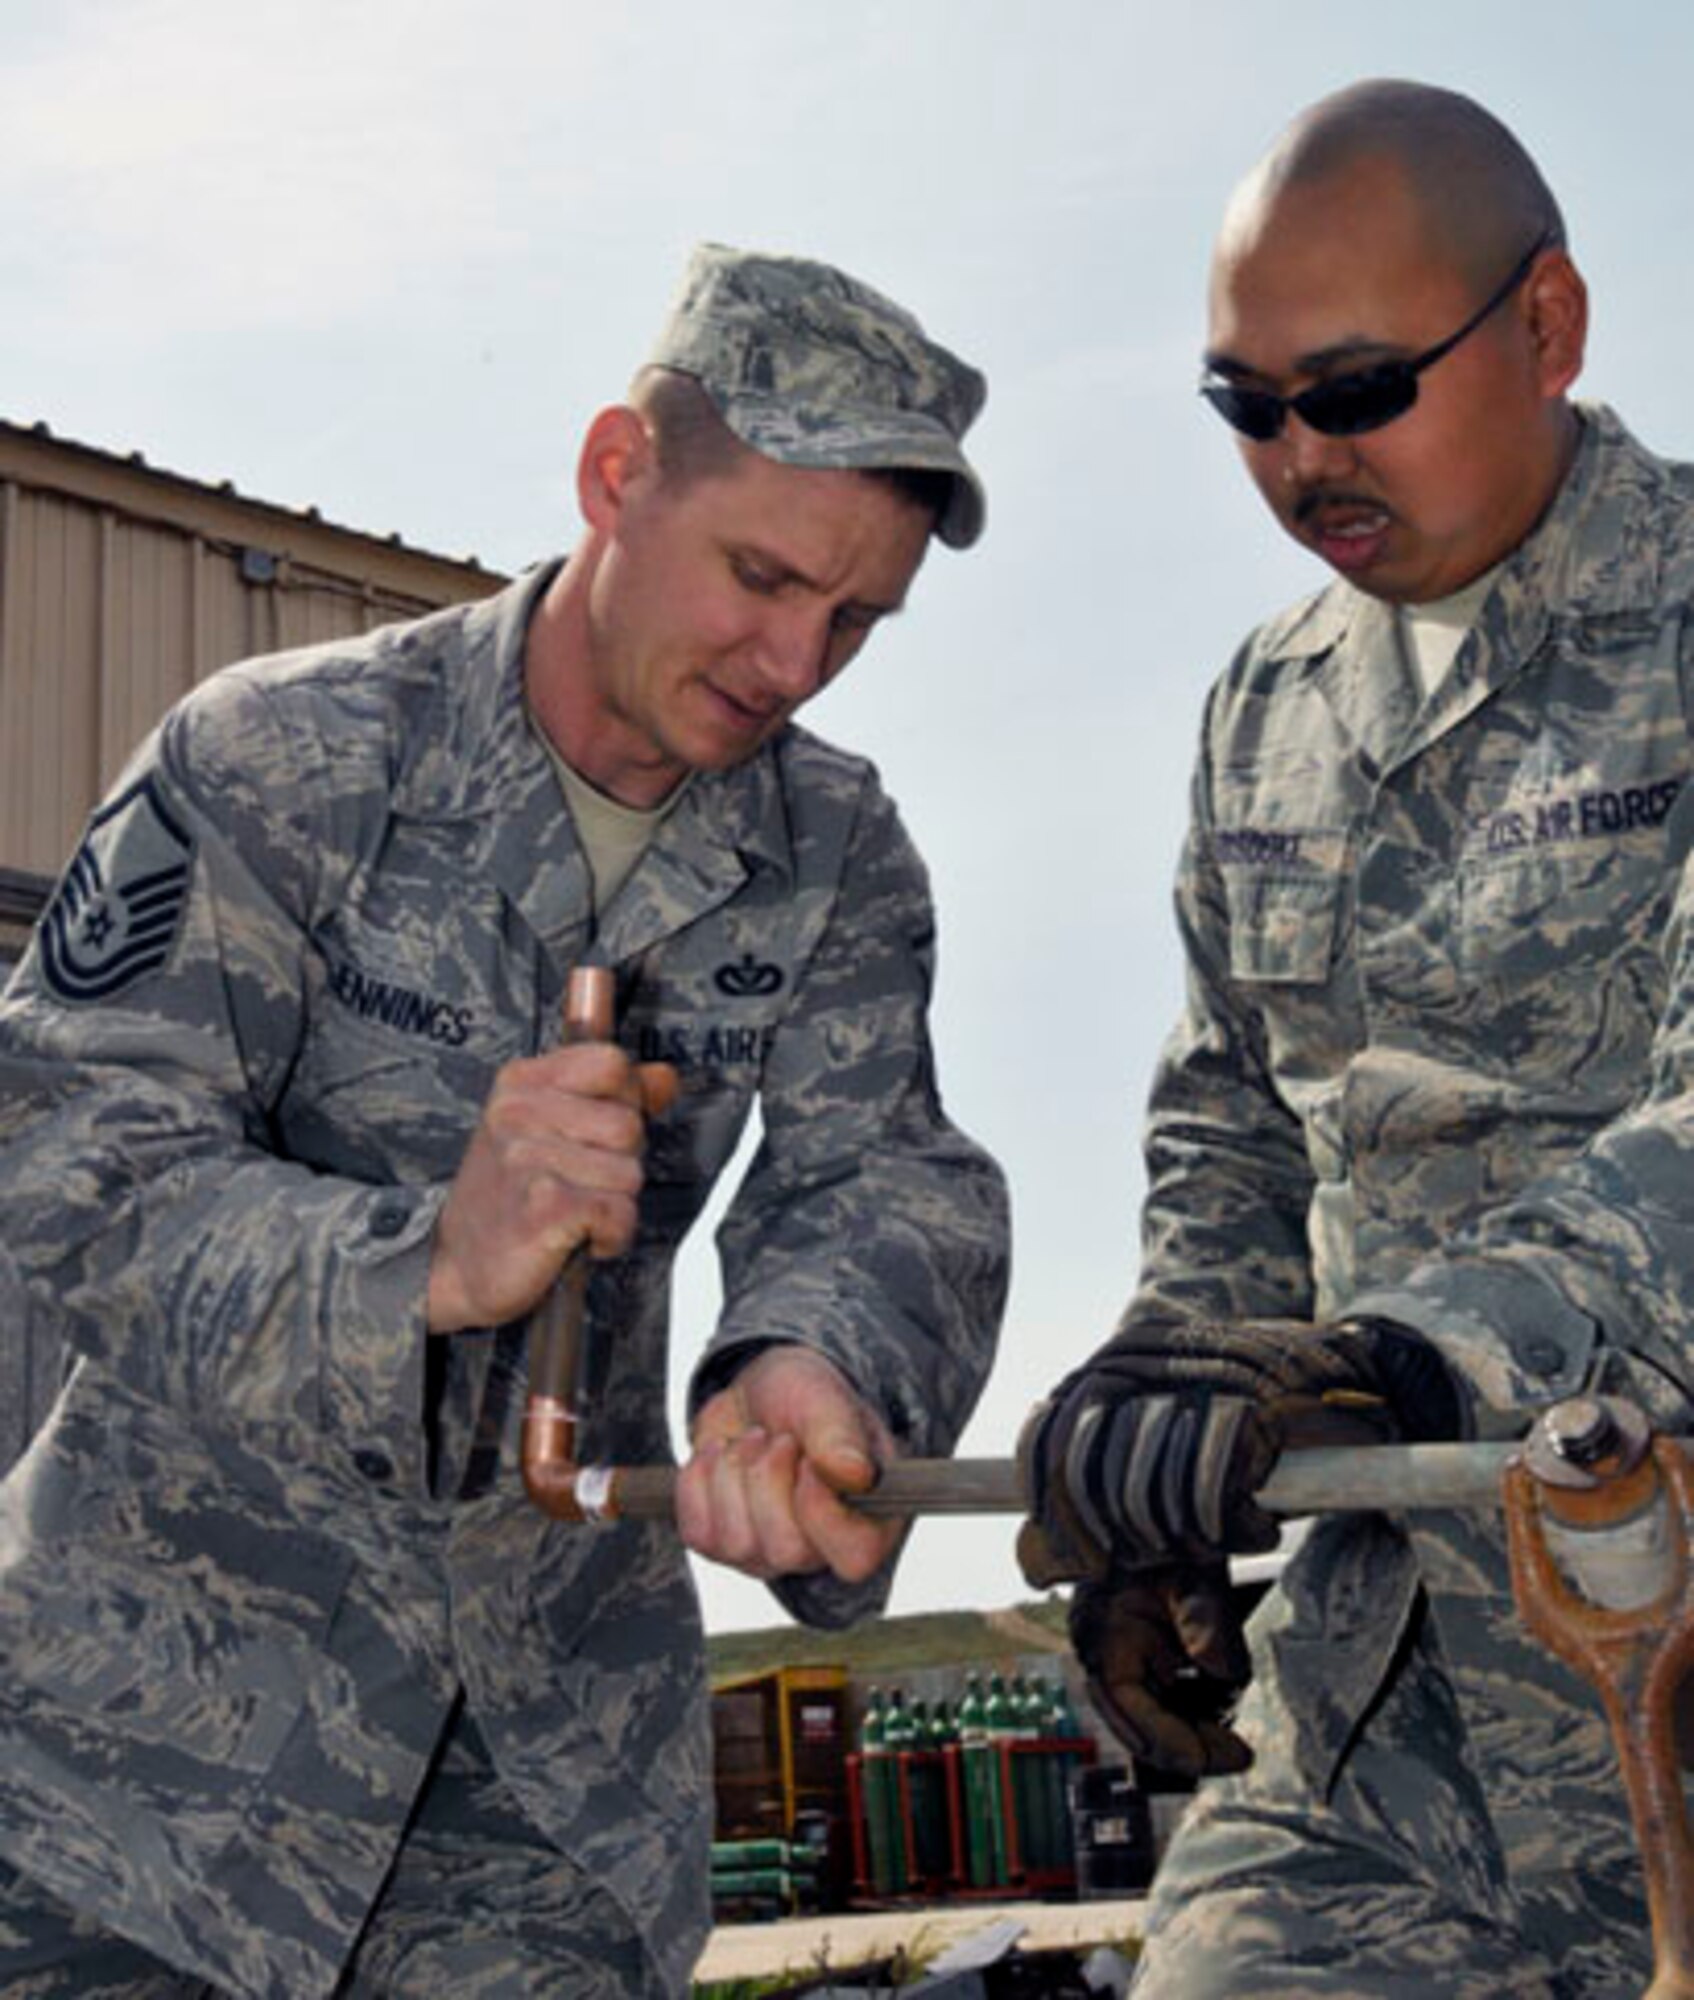 SAN CLEMENTE ISLAND, Calif. -- Master Sgt. Chad Jennings, the supervisor of the Heating, Ventilation, and Air Conditioning Section from the 176th Civil Engineer Squadron, teaches a junior member of his section about preparing pipes for soldering here March 17. The 176 CES, part of the Alaska Air National Guard's 176th Wing, deployed to San Clemente Island for two weeks in March 2011 to train and work on a variety of infrastructure projects. The pipes here were used to hook up a new air compressor. Alaska Air National Guard photo by Staff Sgt. N. Alicia Goldberger. 